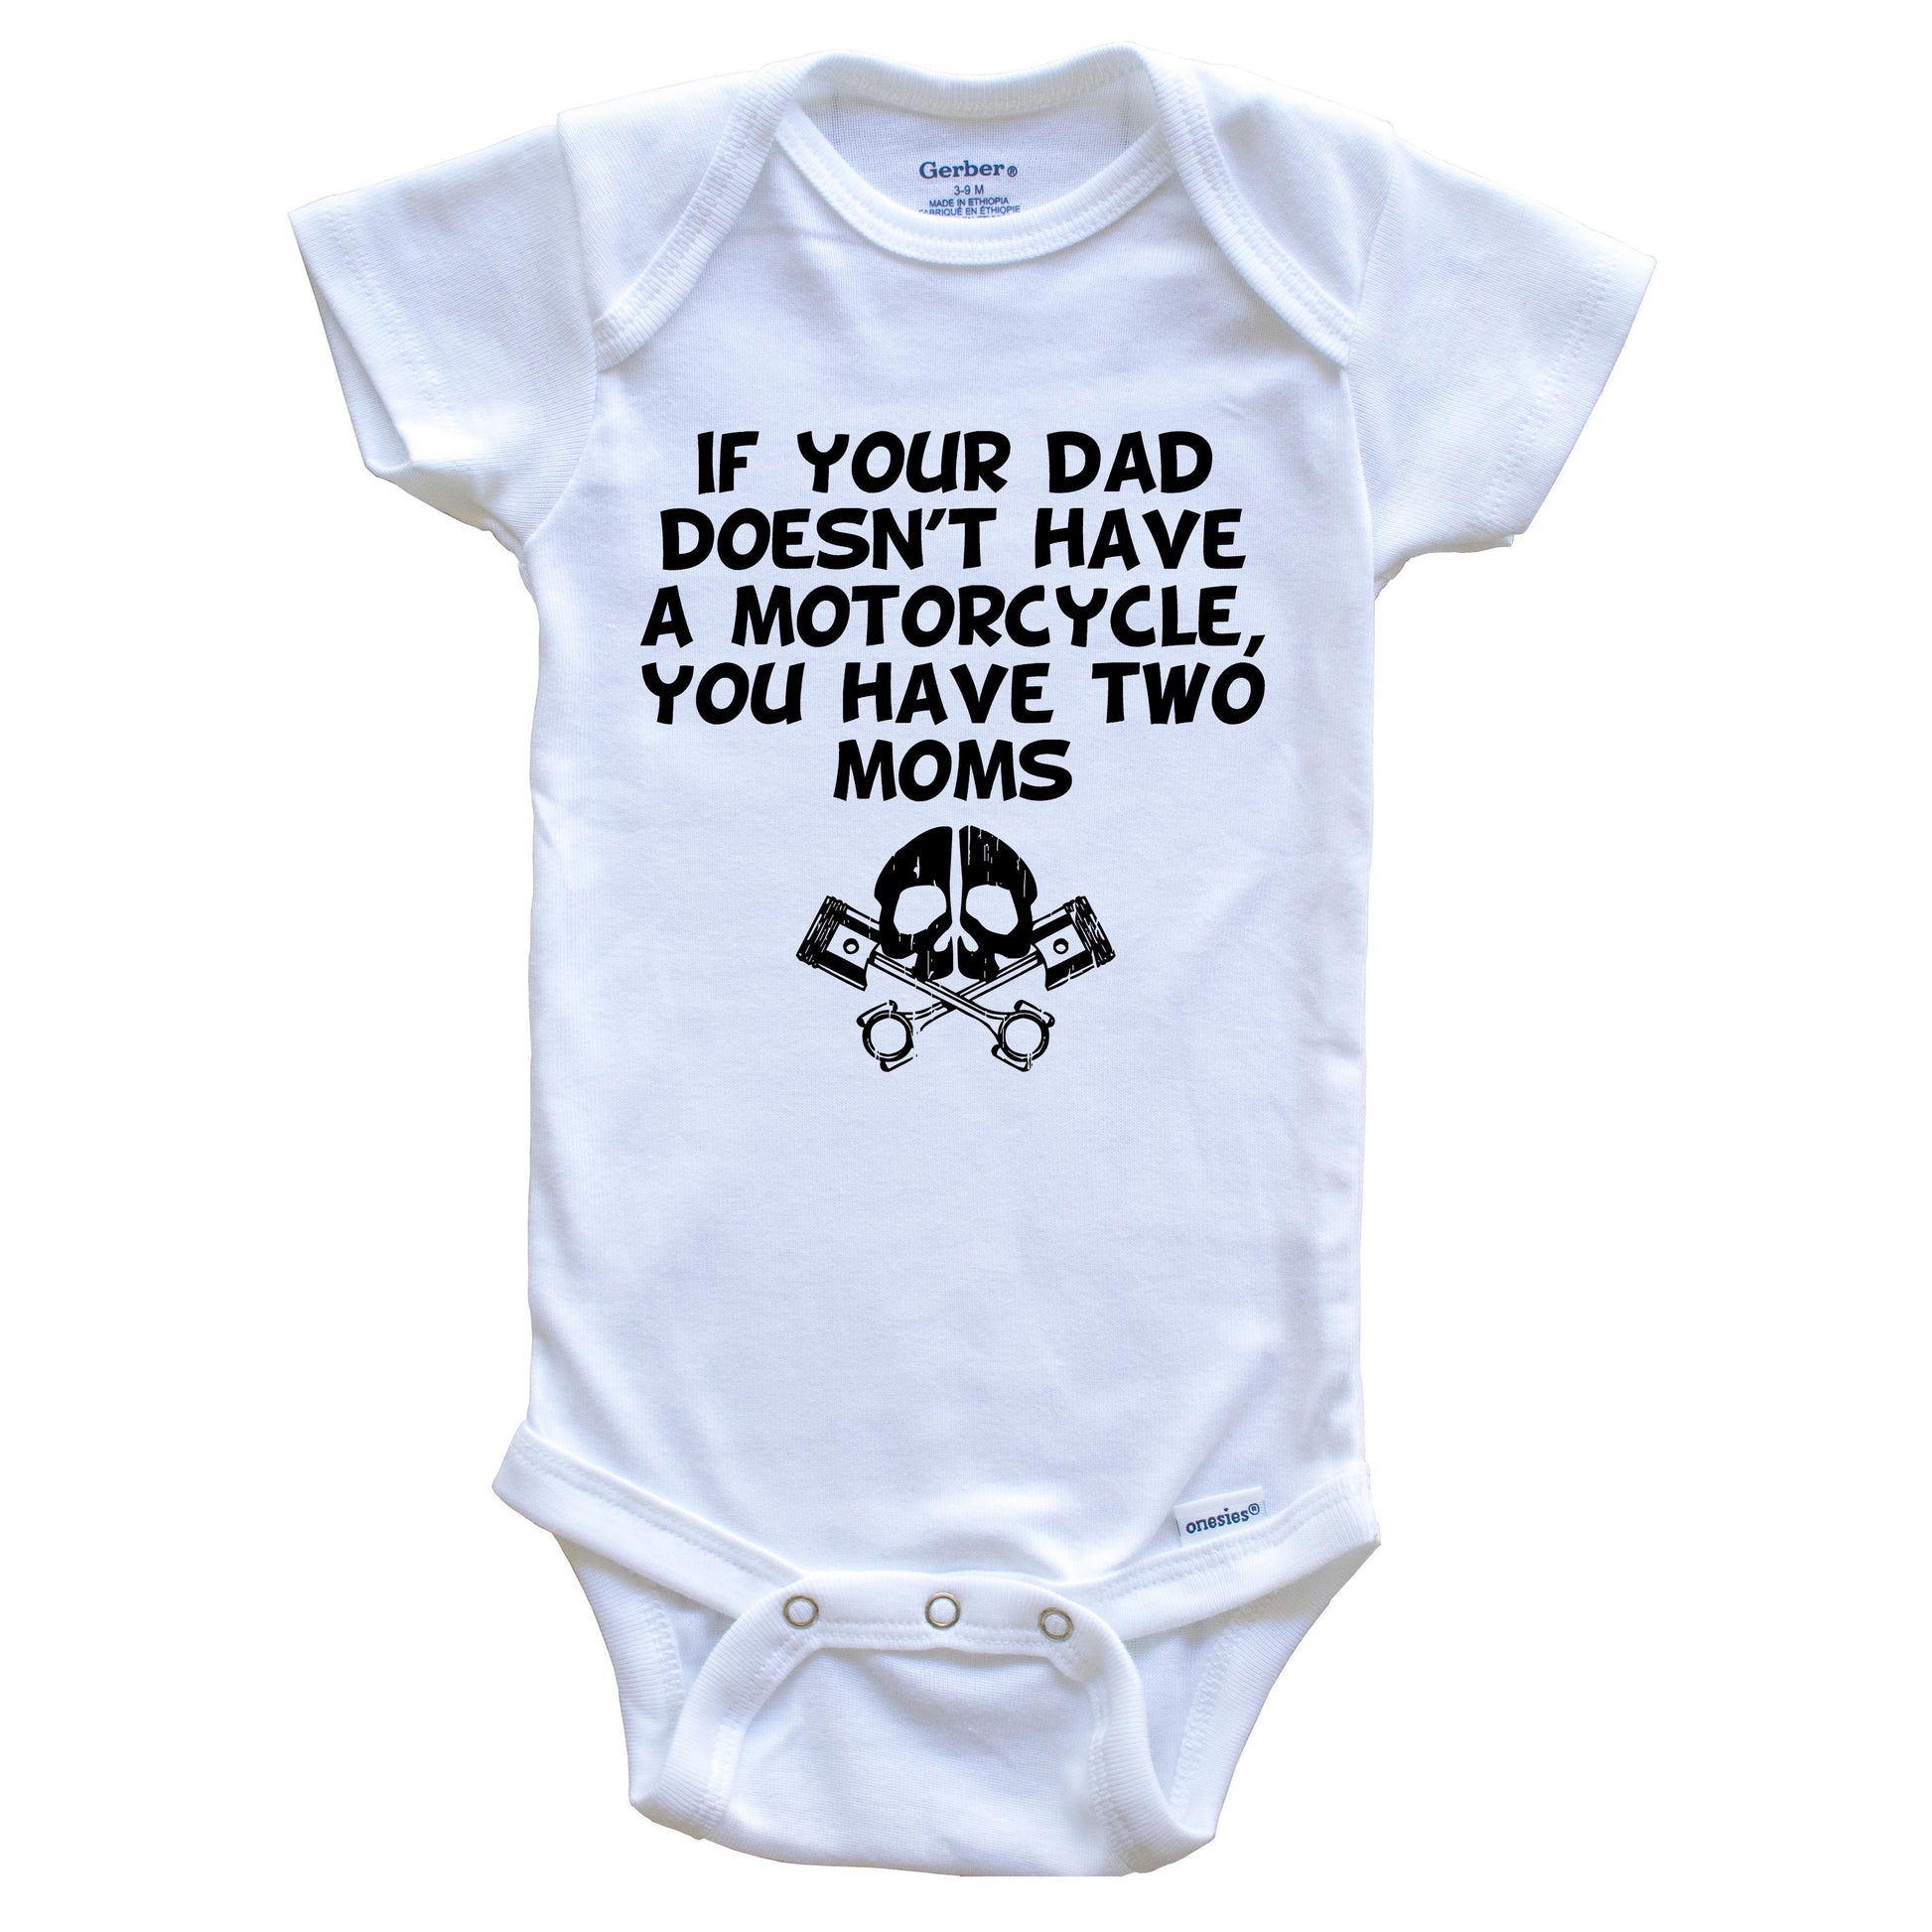 If Your Dad Doesn't Have A Motorcycle You Have Two Moms Funny Baby Onesie